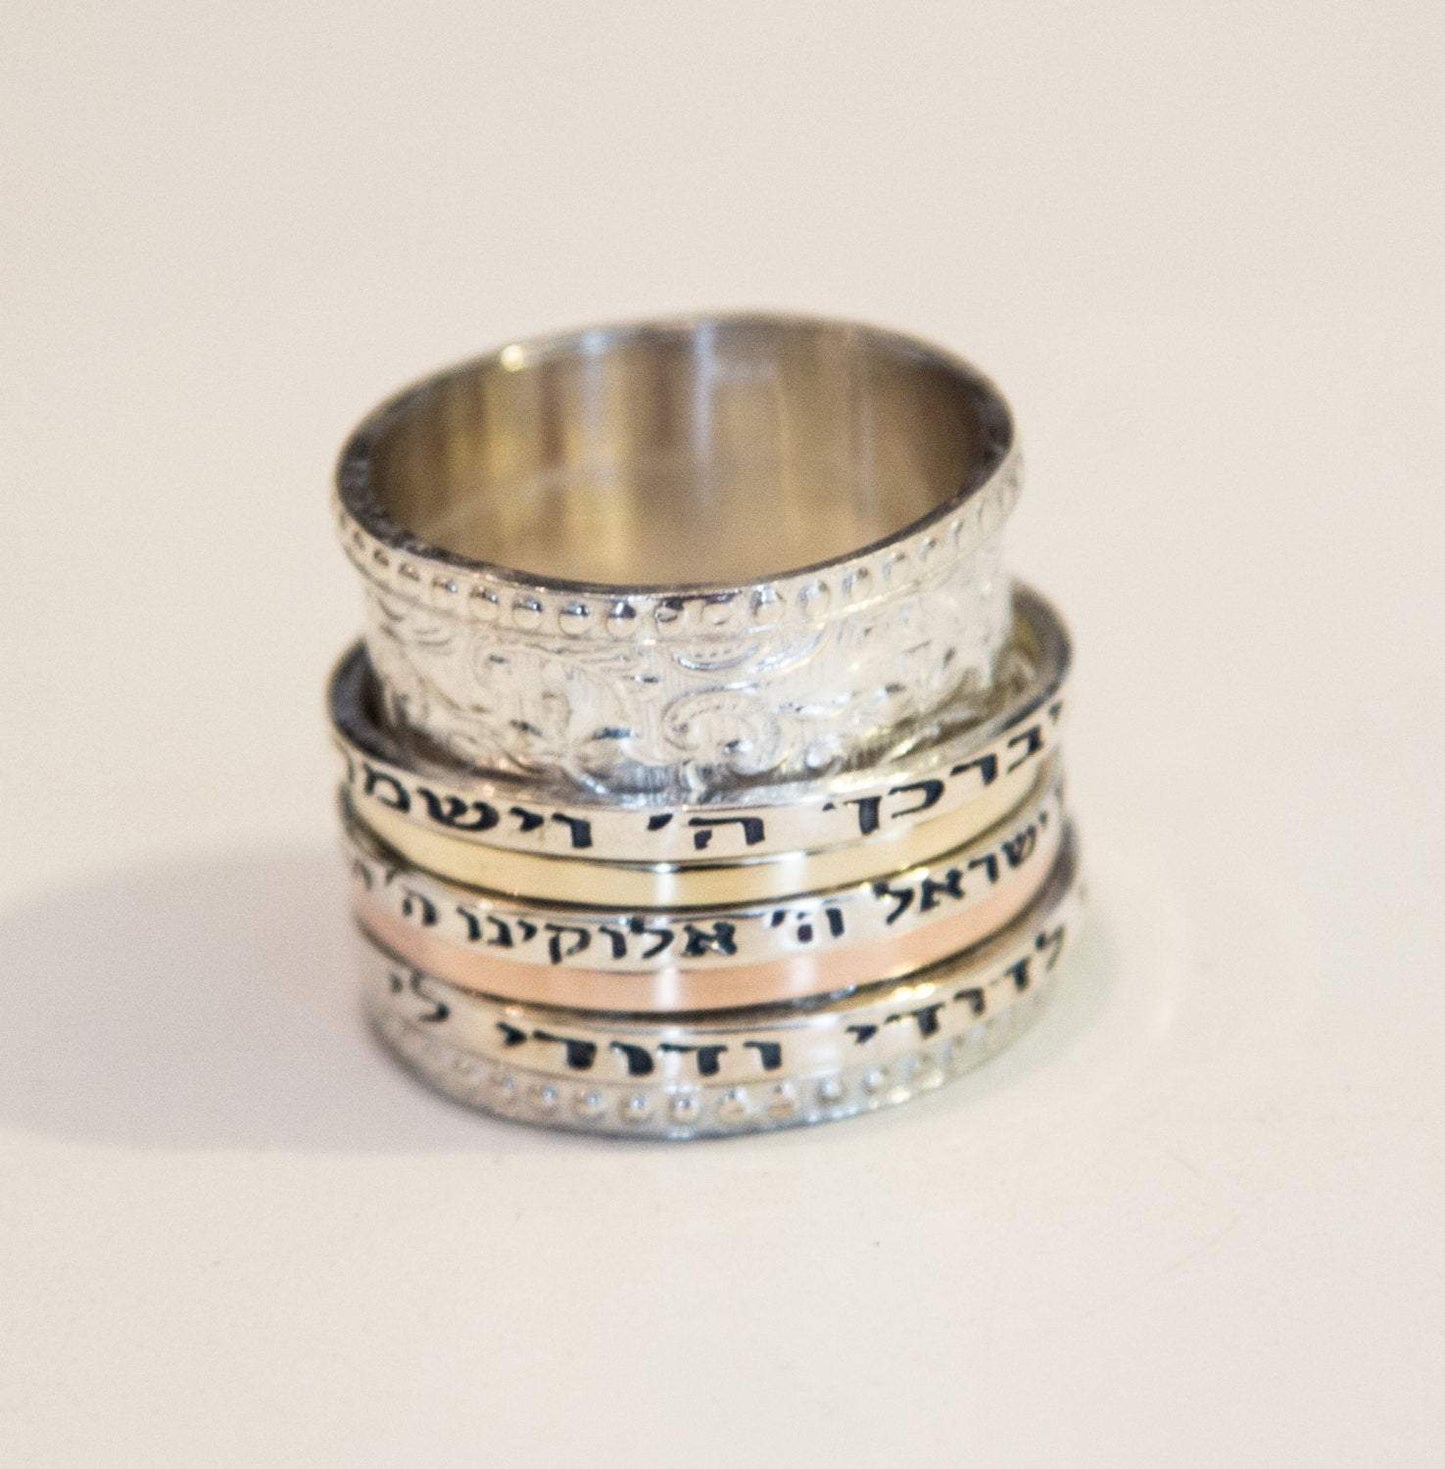 Hebrew Ring – 925 Sterling Silver Spinner Ring “Gam Zeh Ya'avor” (This  Shell Pass Too), Personalized Ring, Judaica Ring, Jewish Ring, Sali –  salijewelry.com